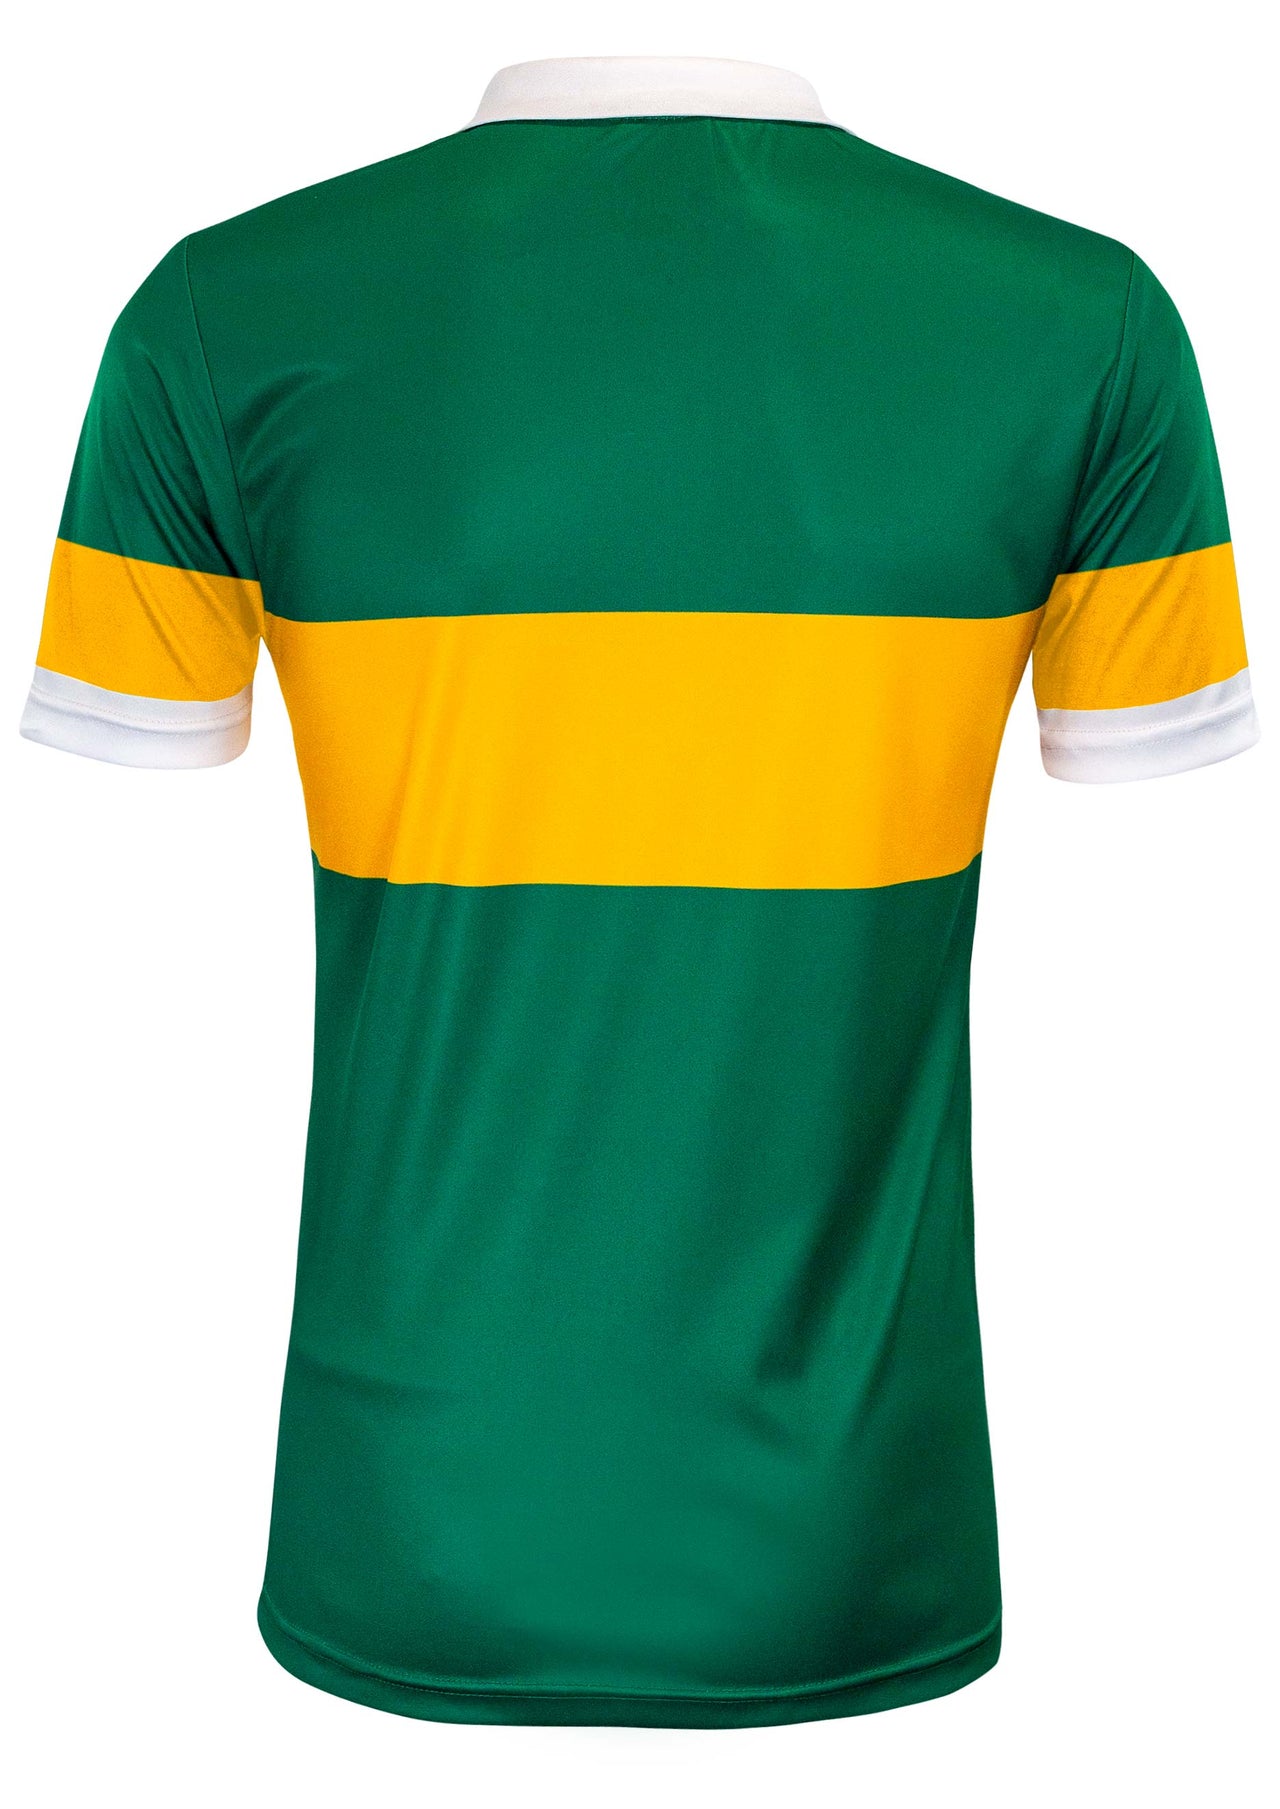 Rathvilly GAA Retro Jersey Player Fit Adult